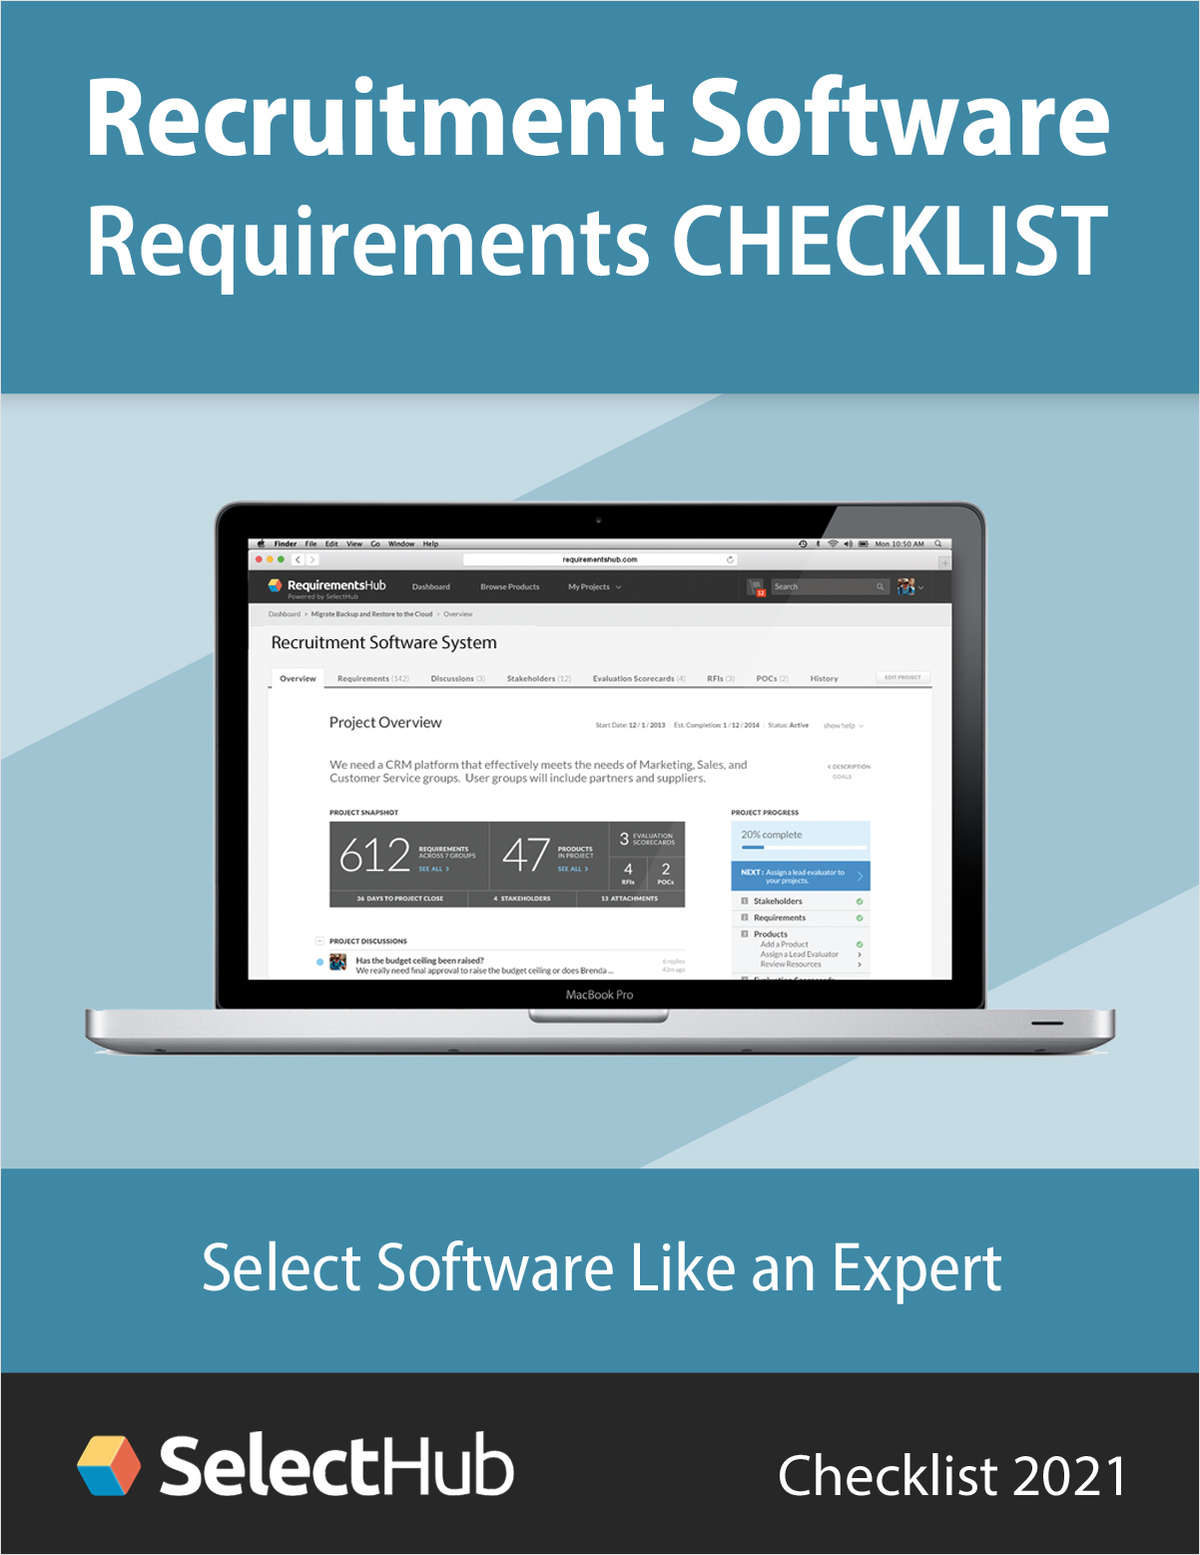 Recruitment Software Requirements Checklist for 2021